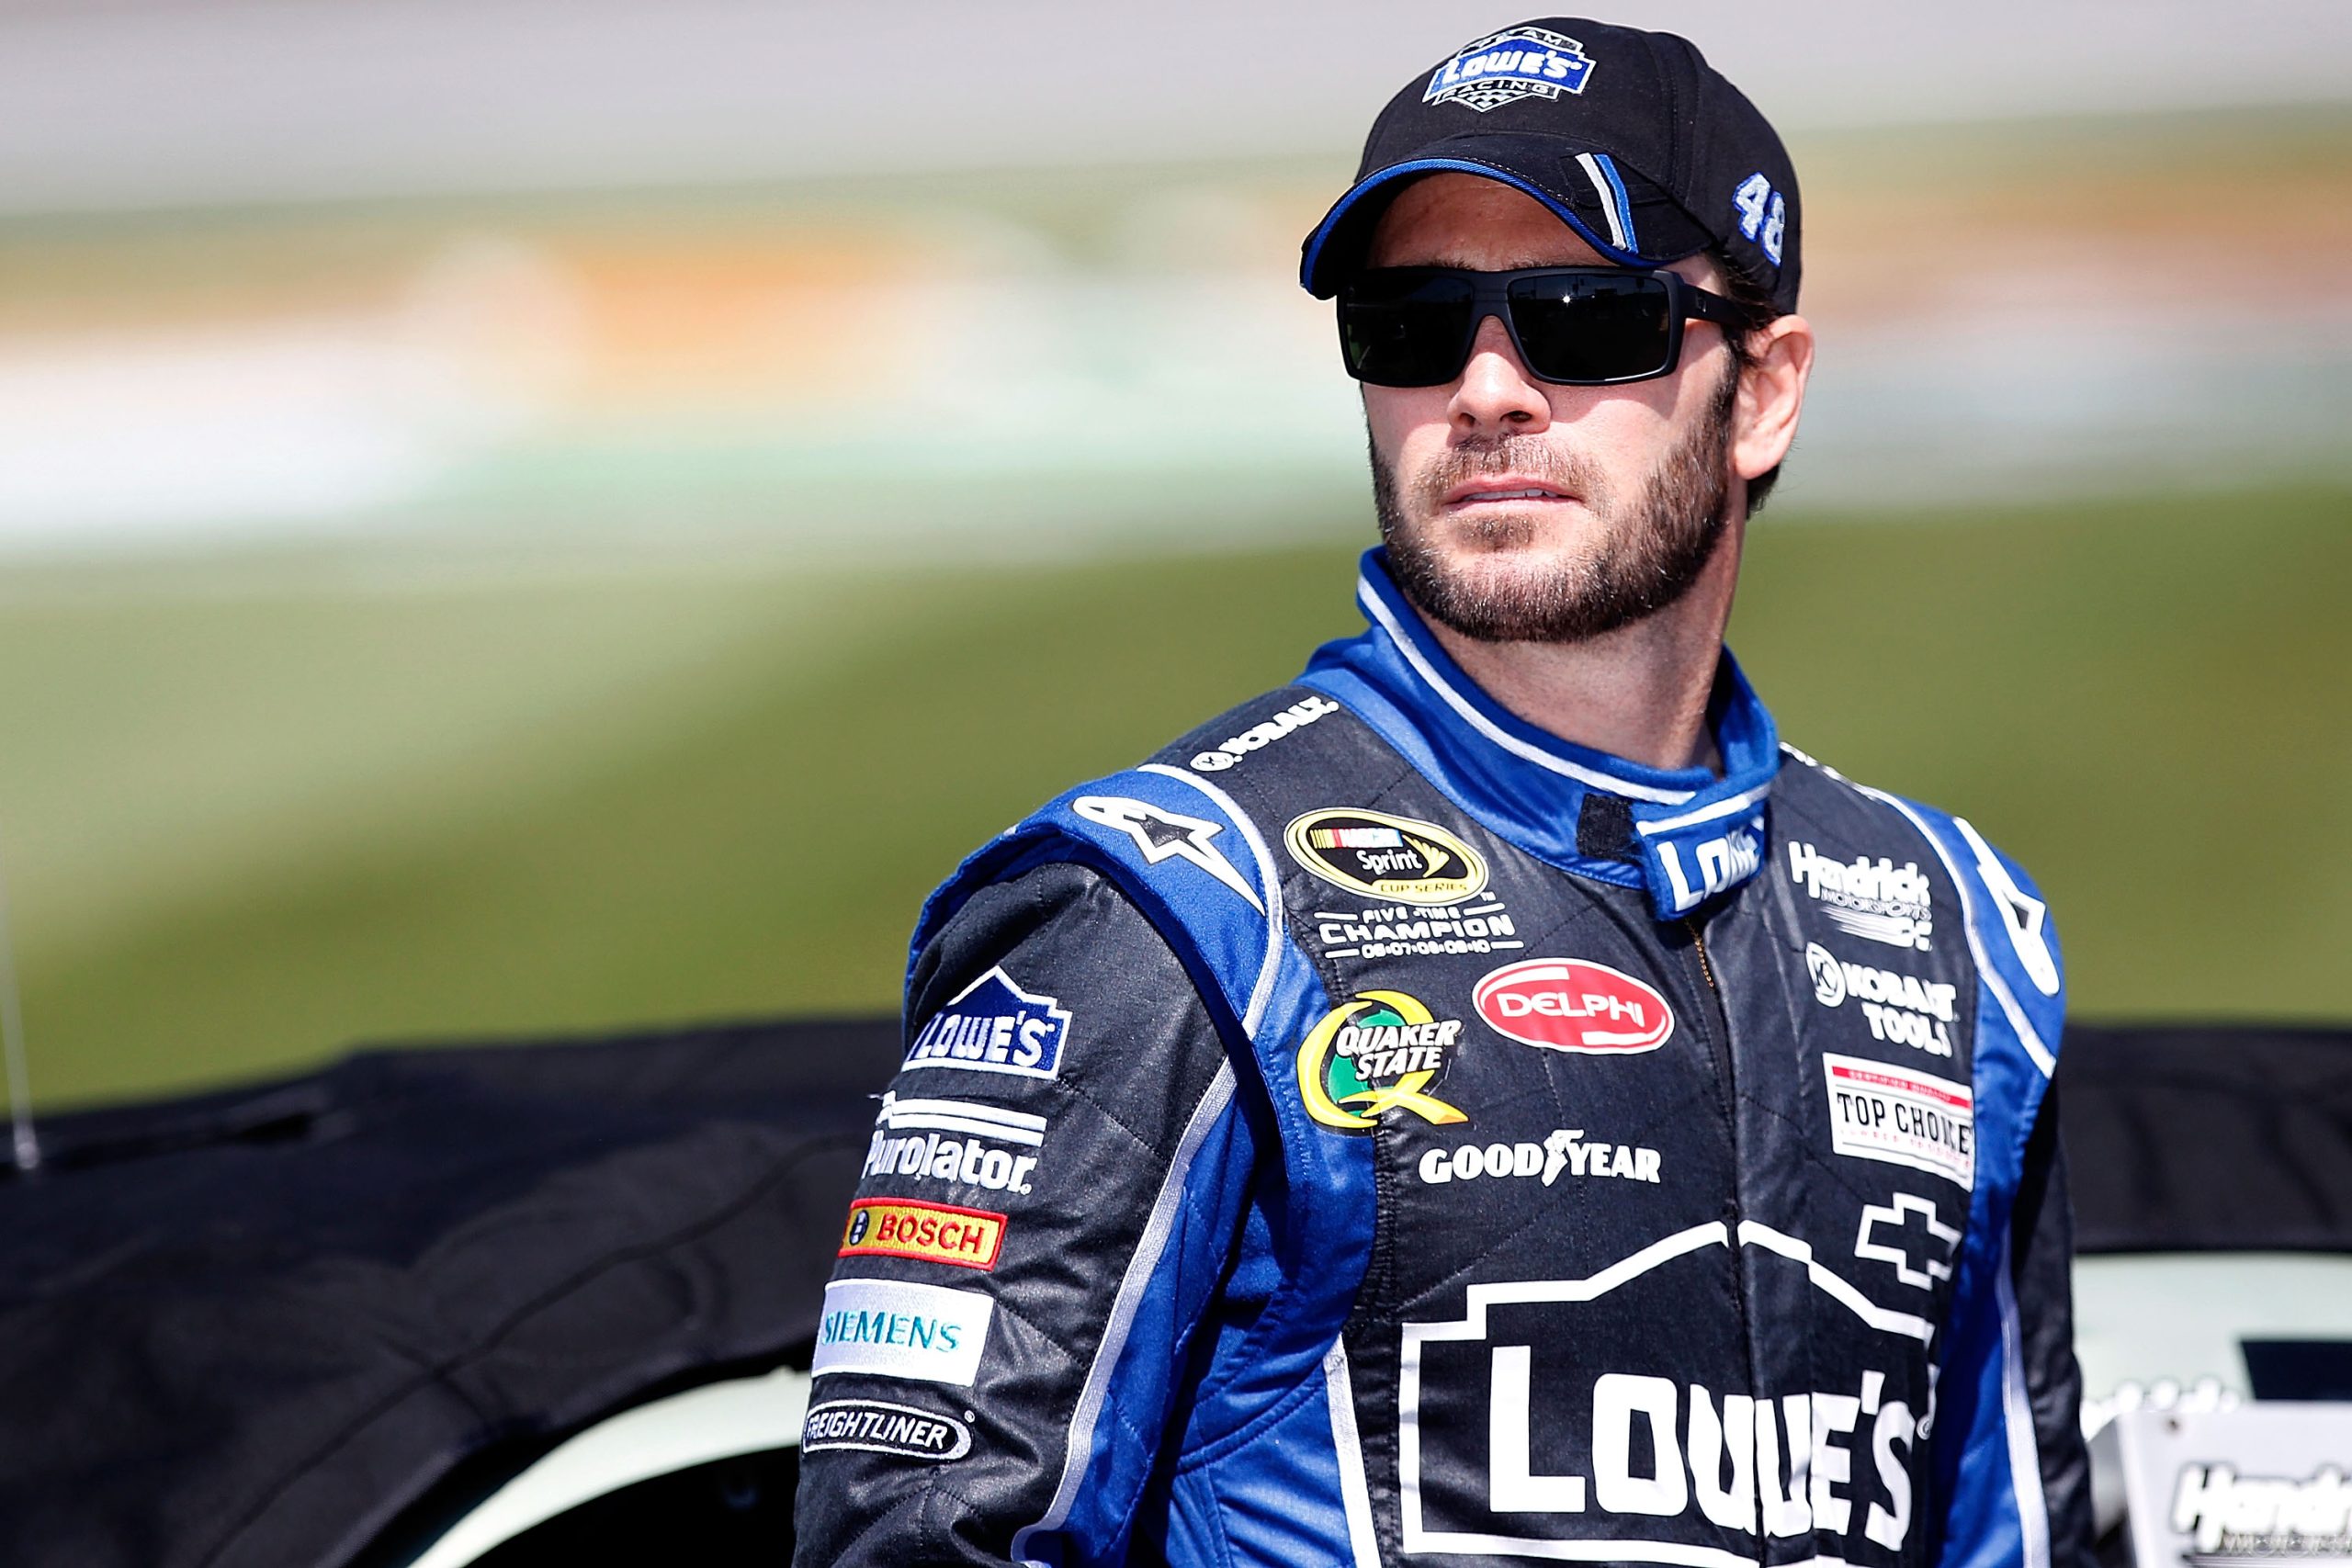 Jimmie Johnson tells a story of cheating in NASCAR championship